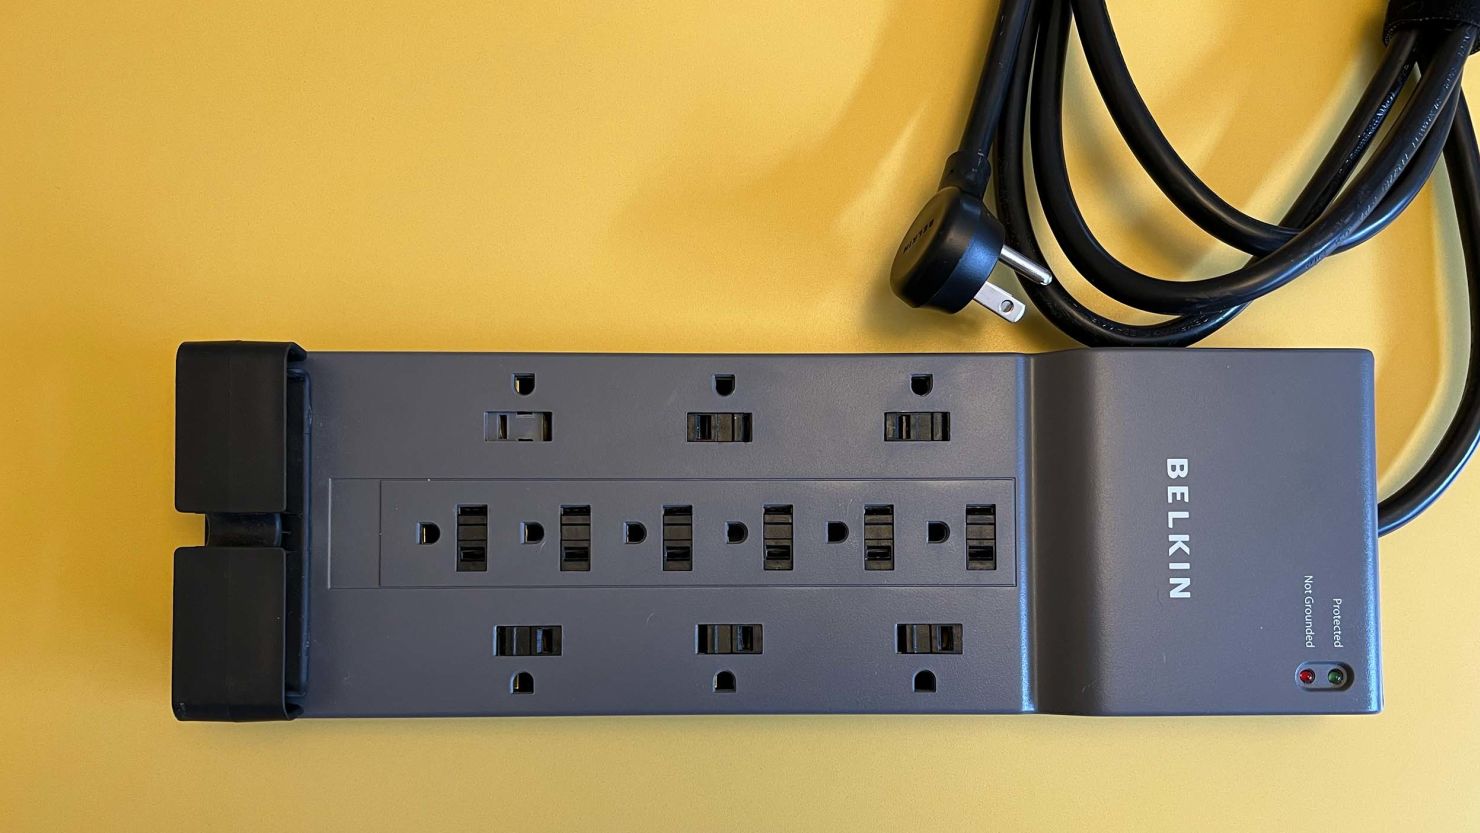 Behind TV Surge Protector: Power Up Your Entertainment Safely